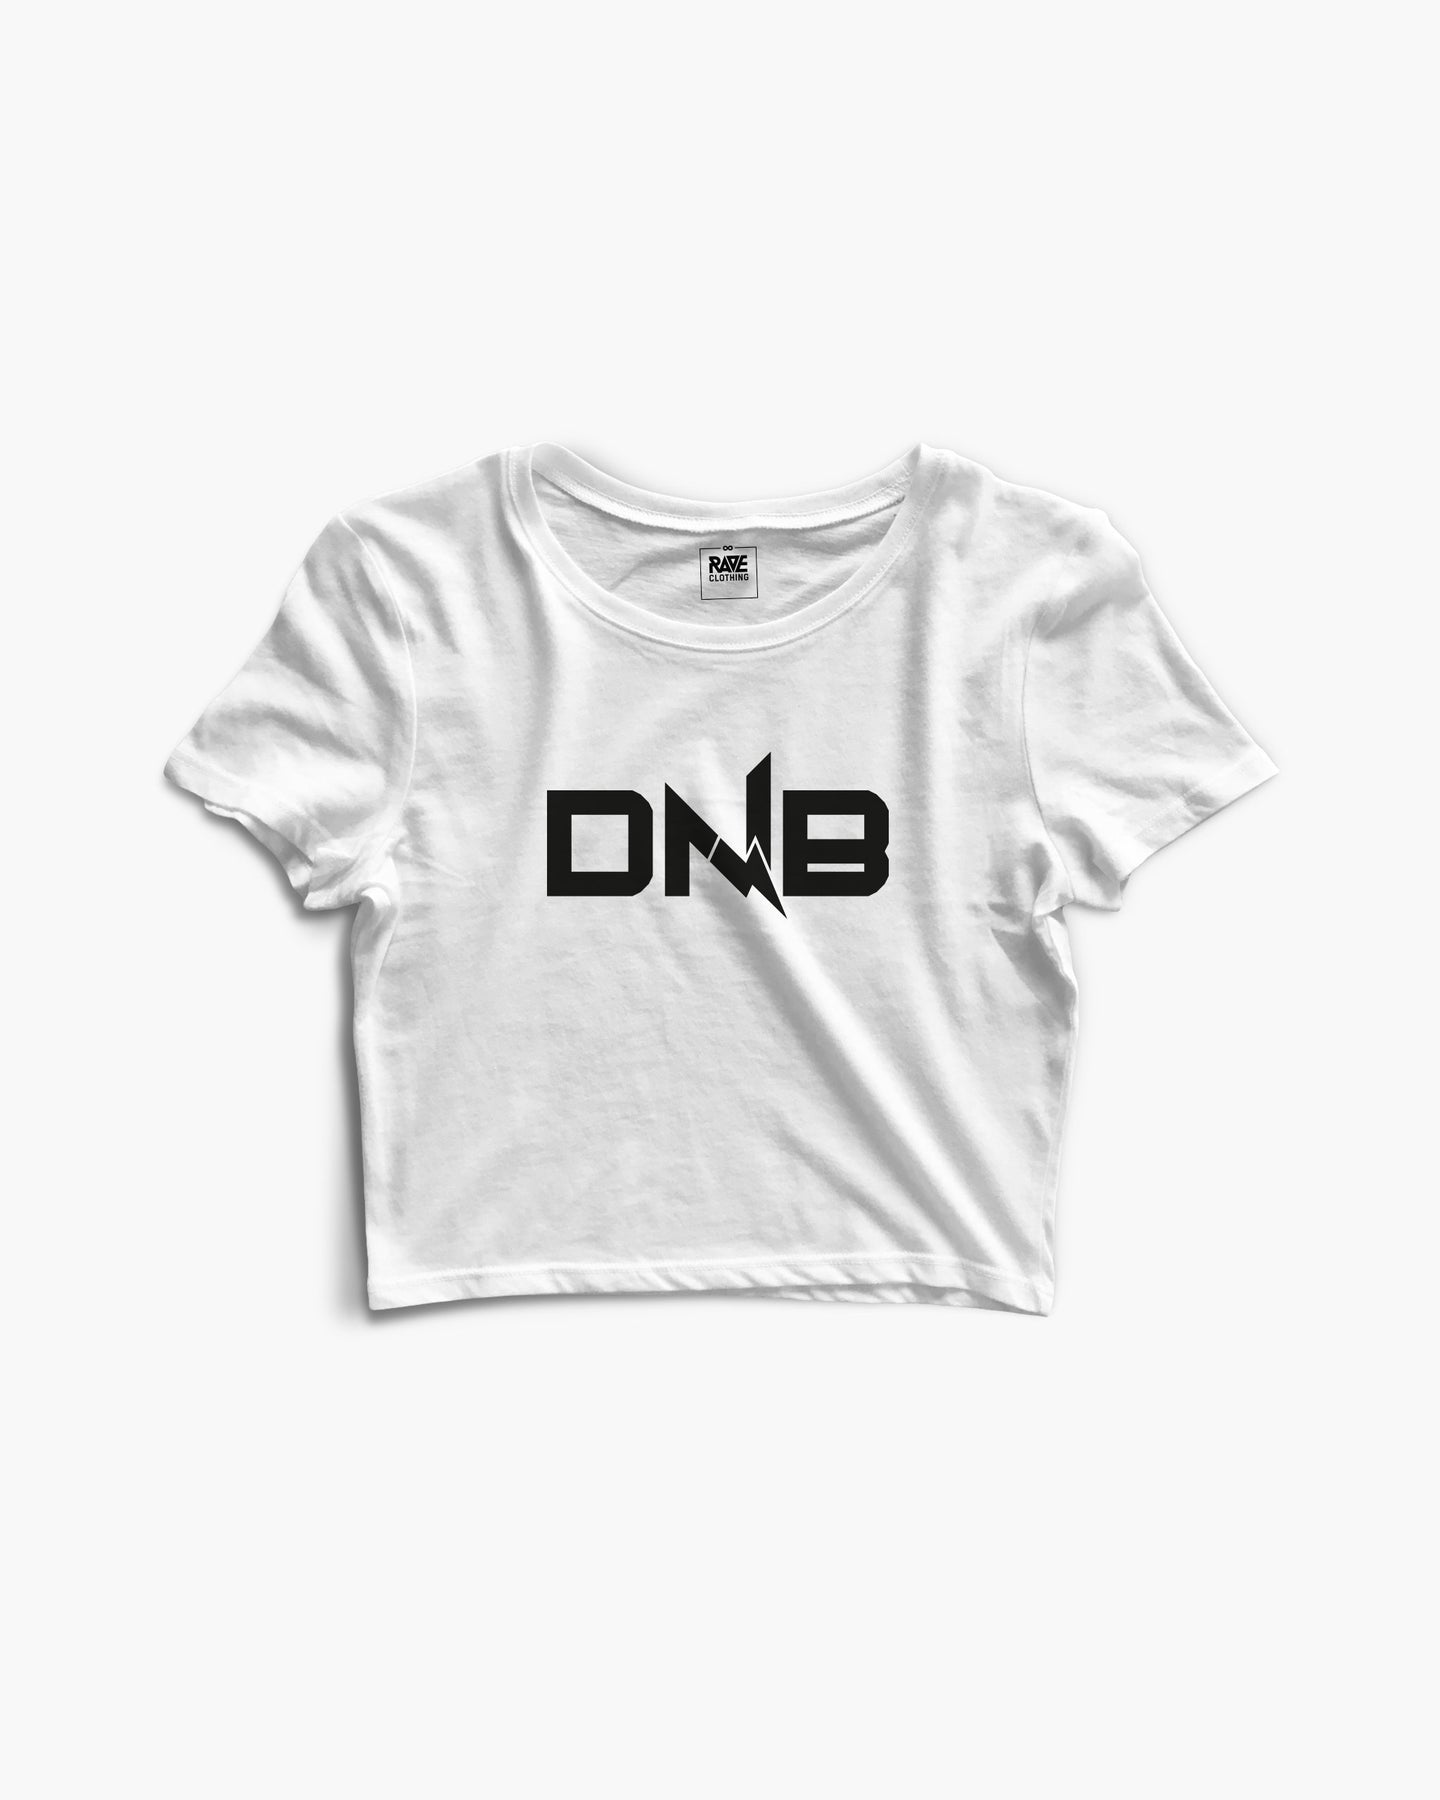 DNB Flash Crop Top in White | RAVE Clothing online store